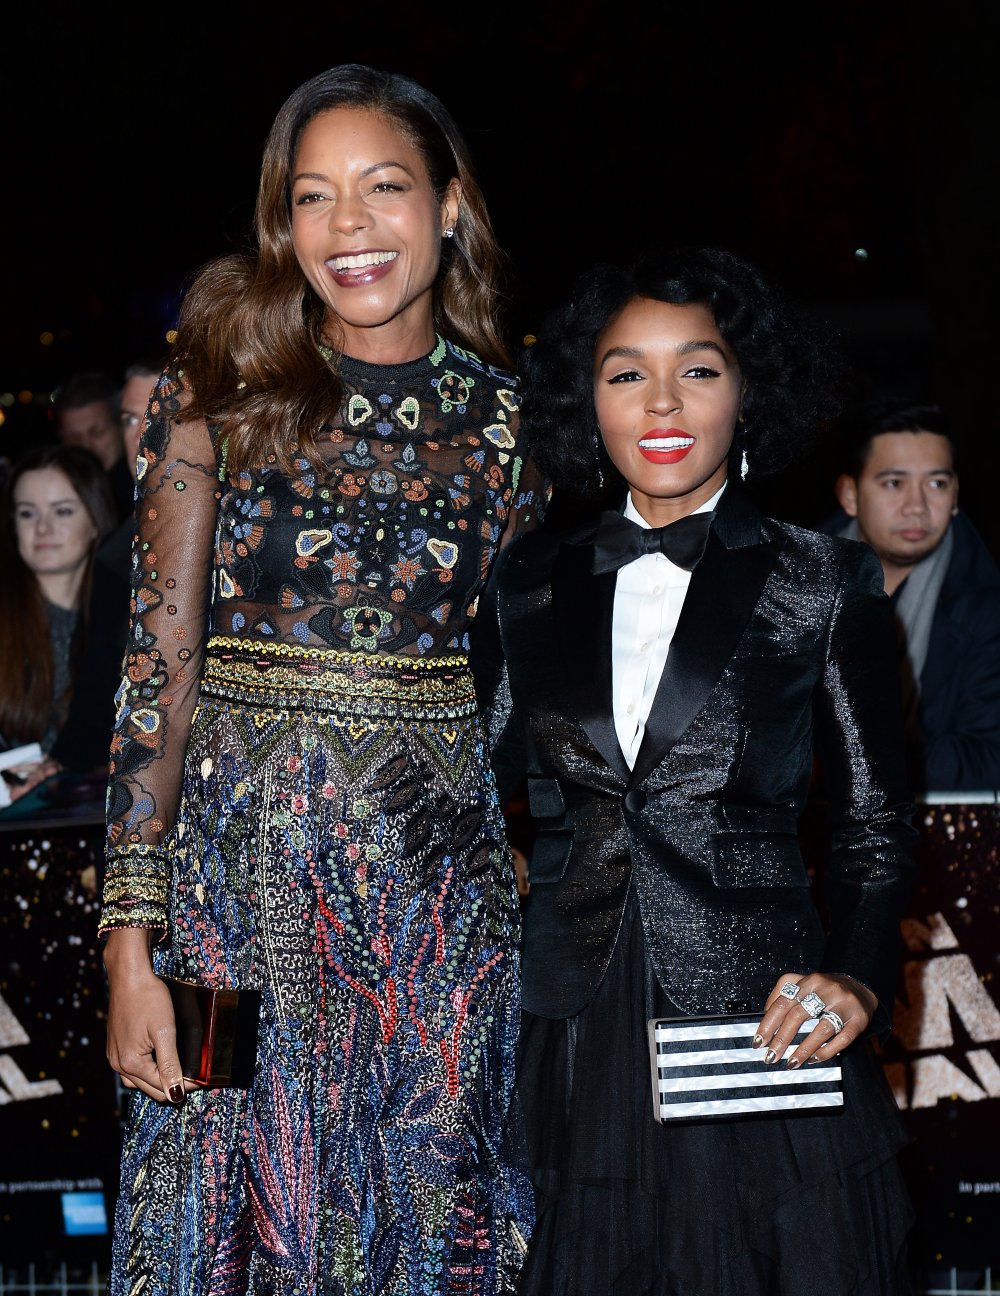 Naomie Harris and Janelle Monáe at the European premiere of Moonlight